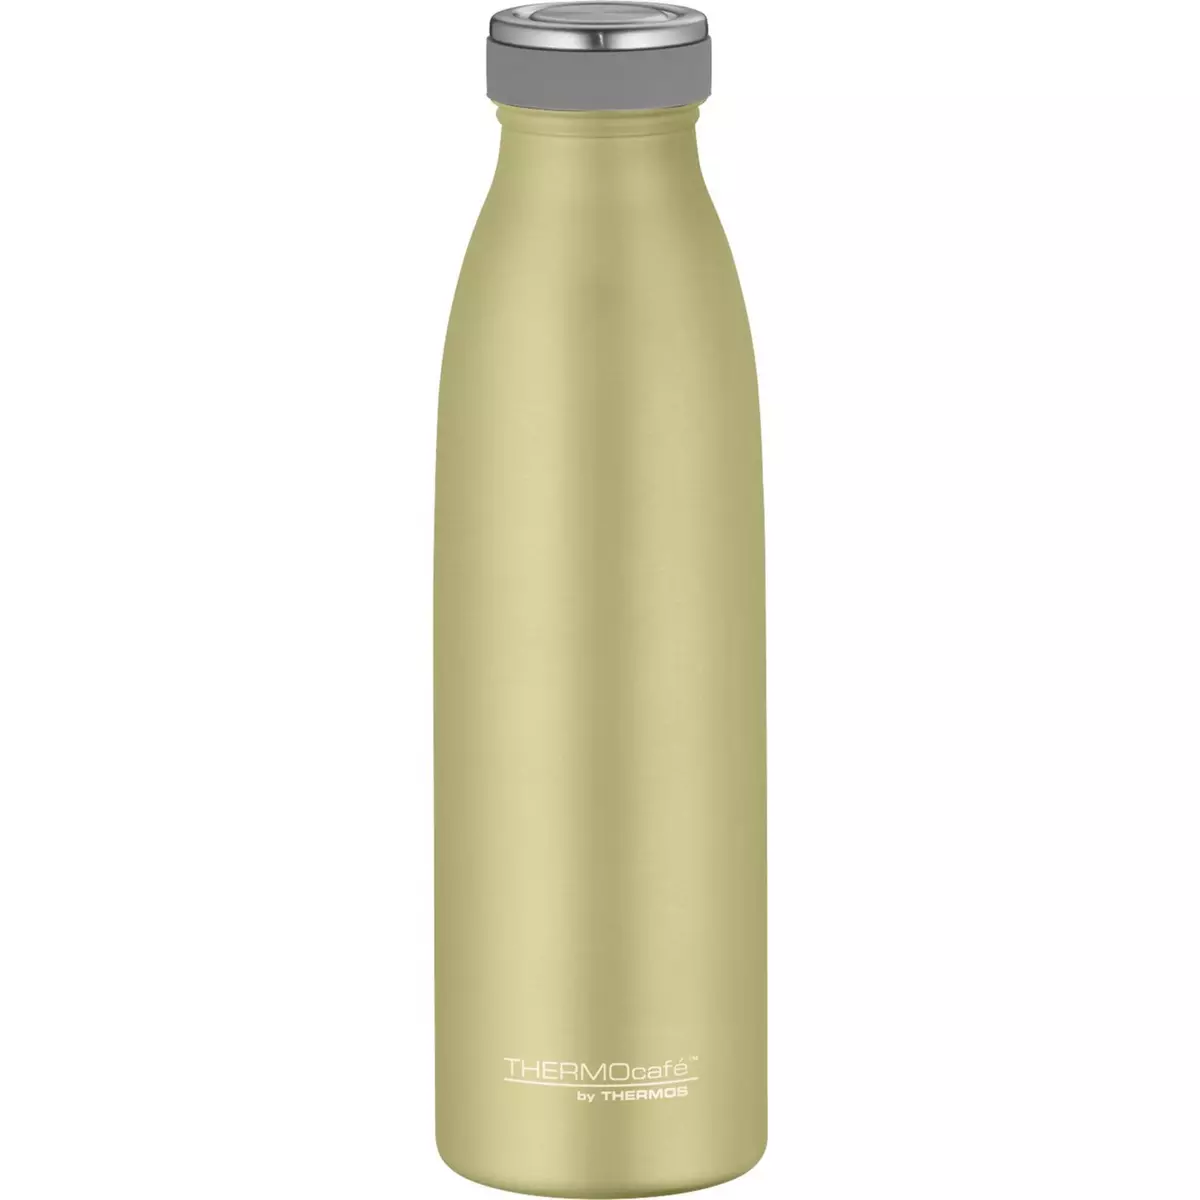 Thermos gourde chaud froid 0.5L